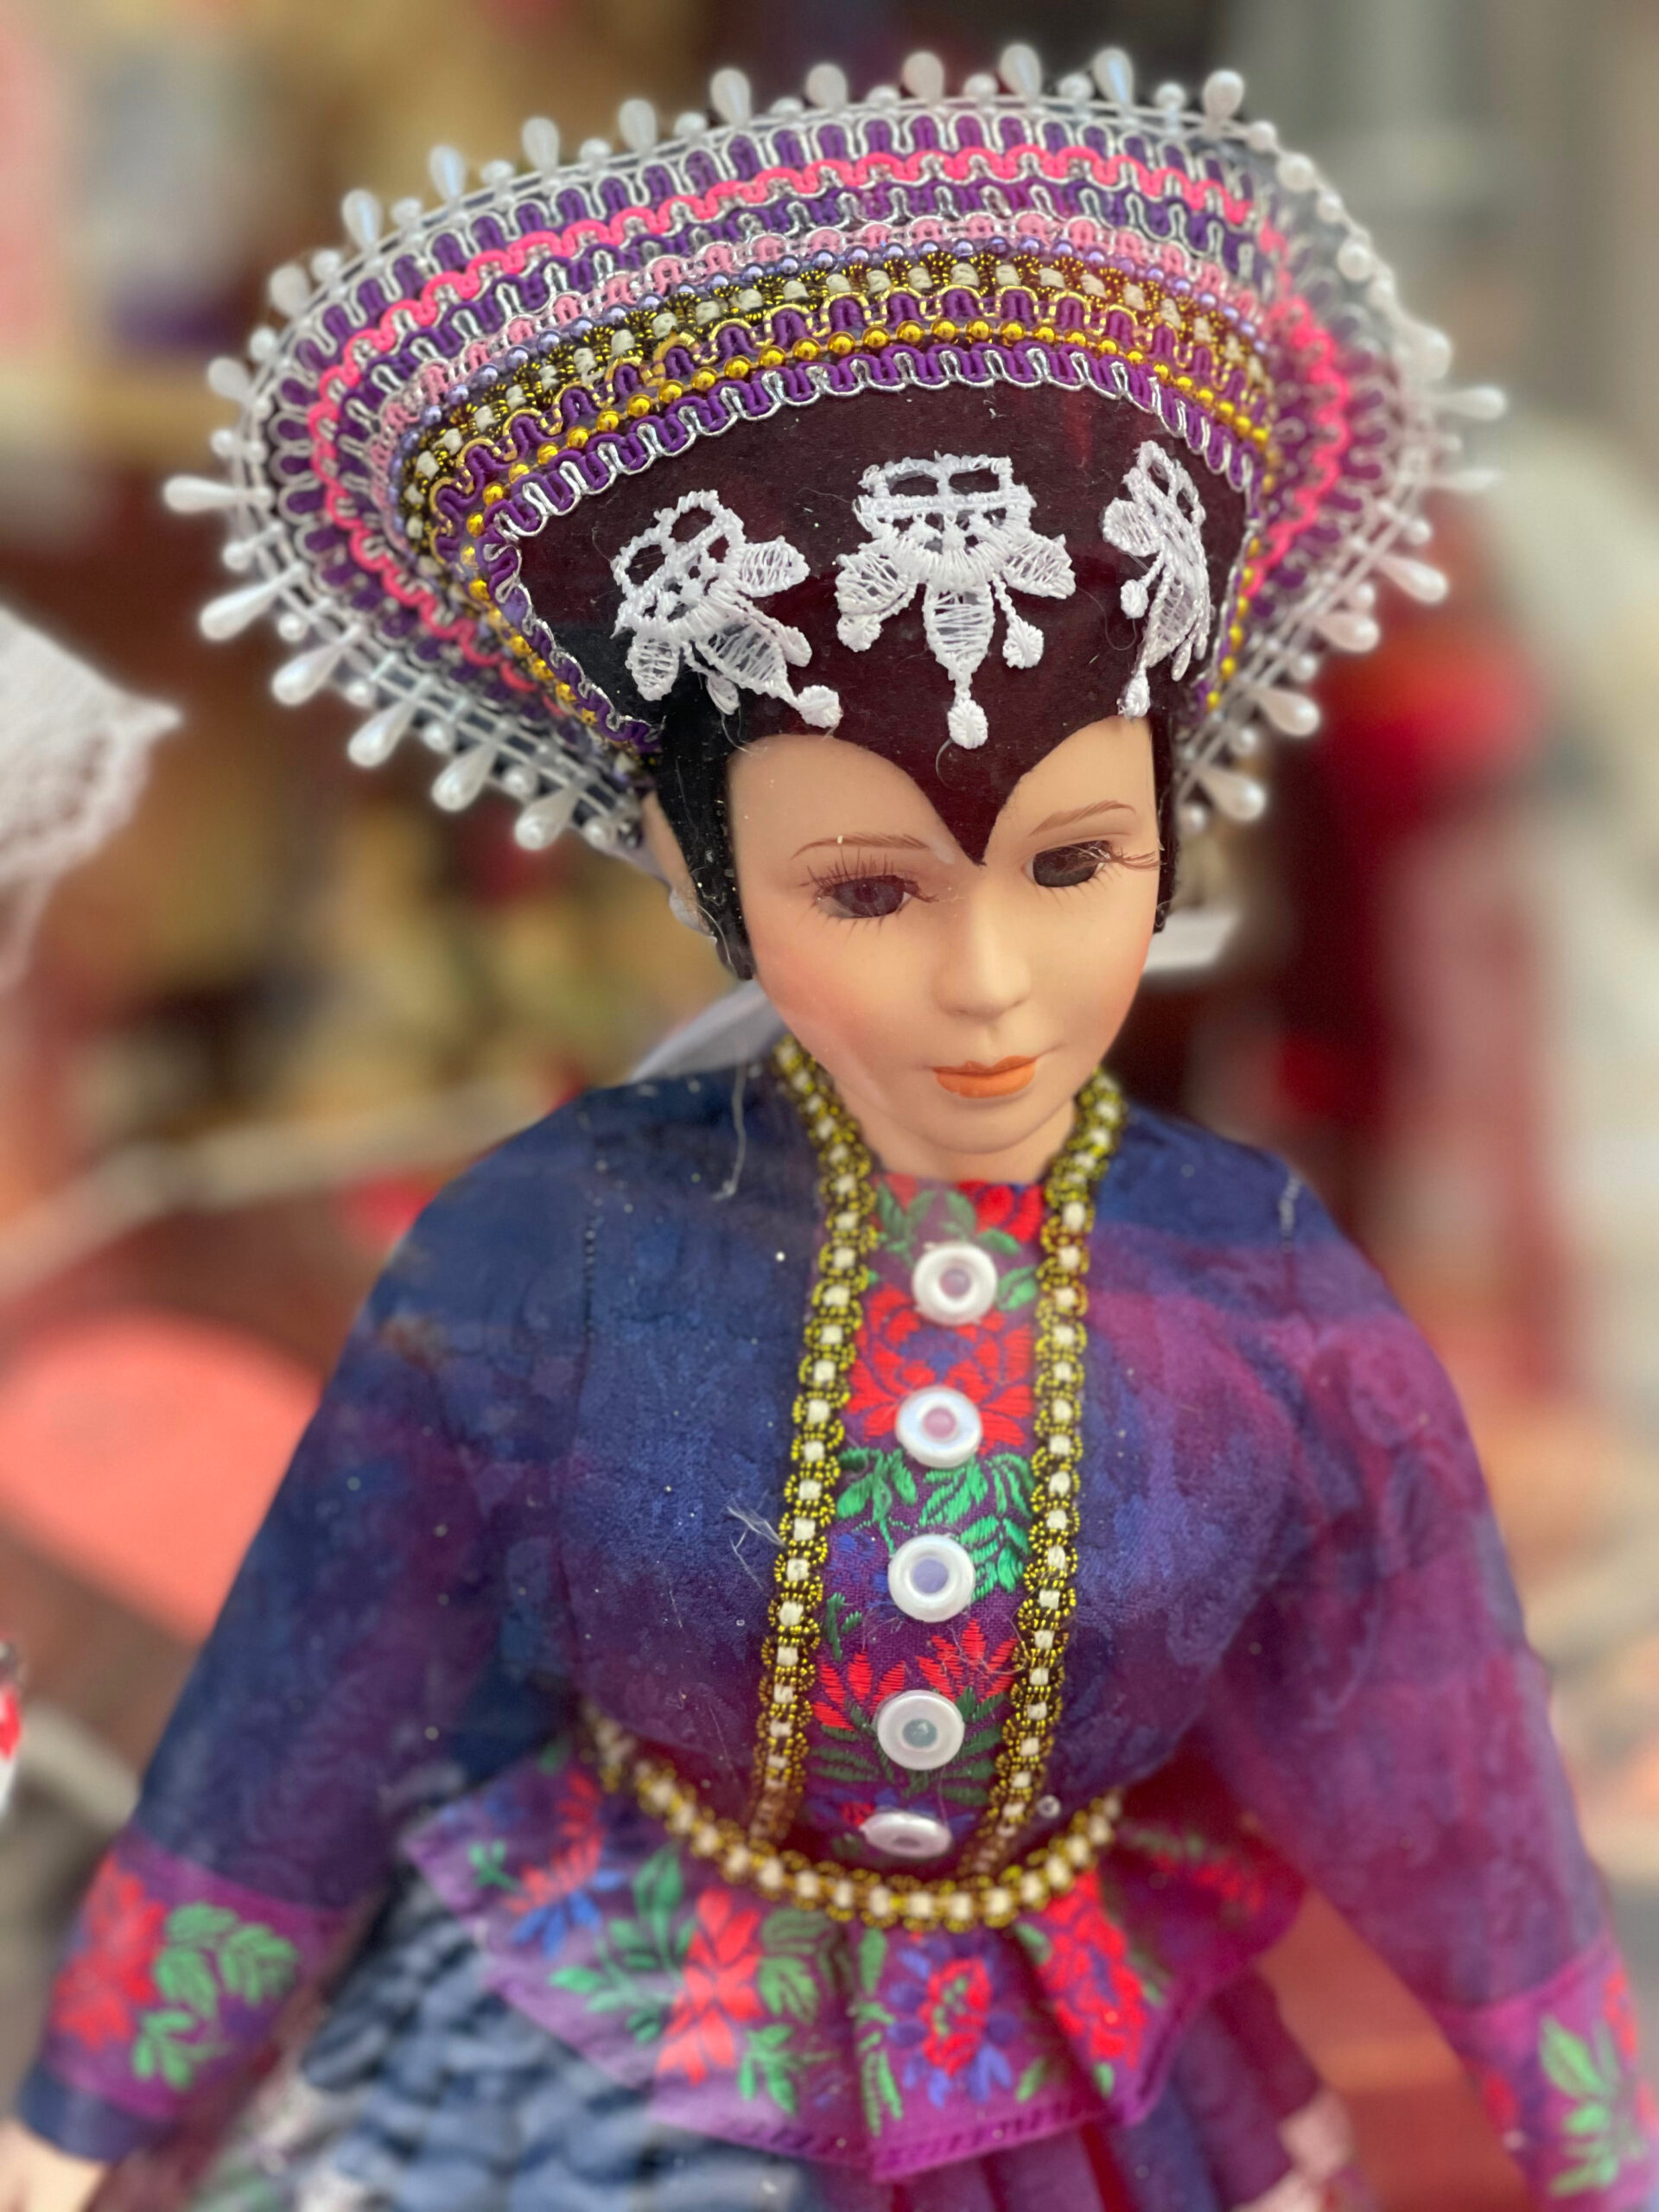 a doll dressed in a traditional blue blouse with embellished ribbon and elaborate hat